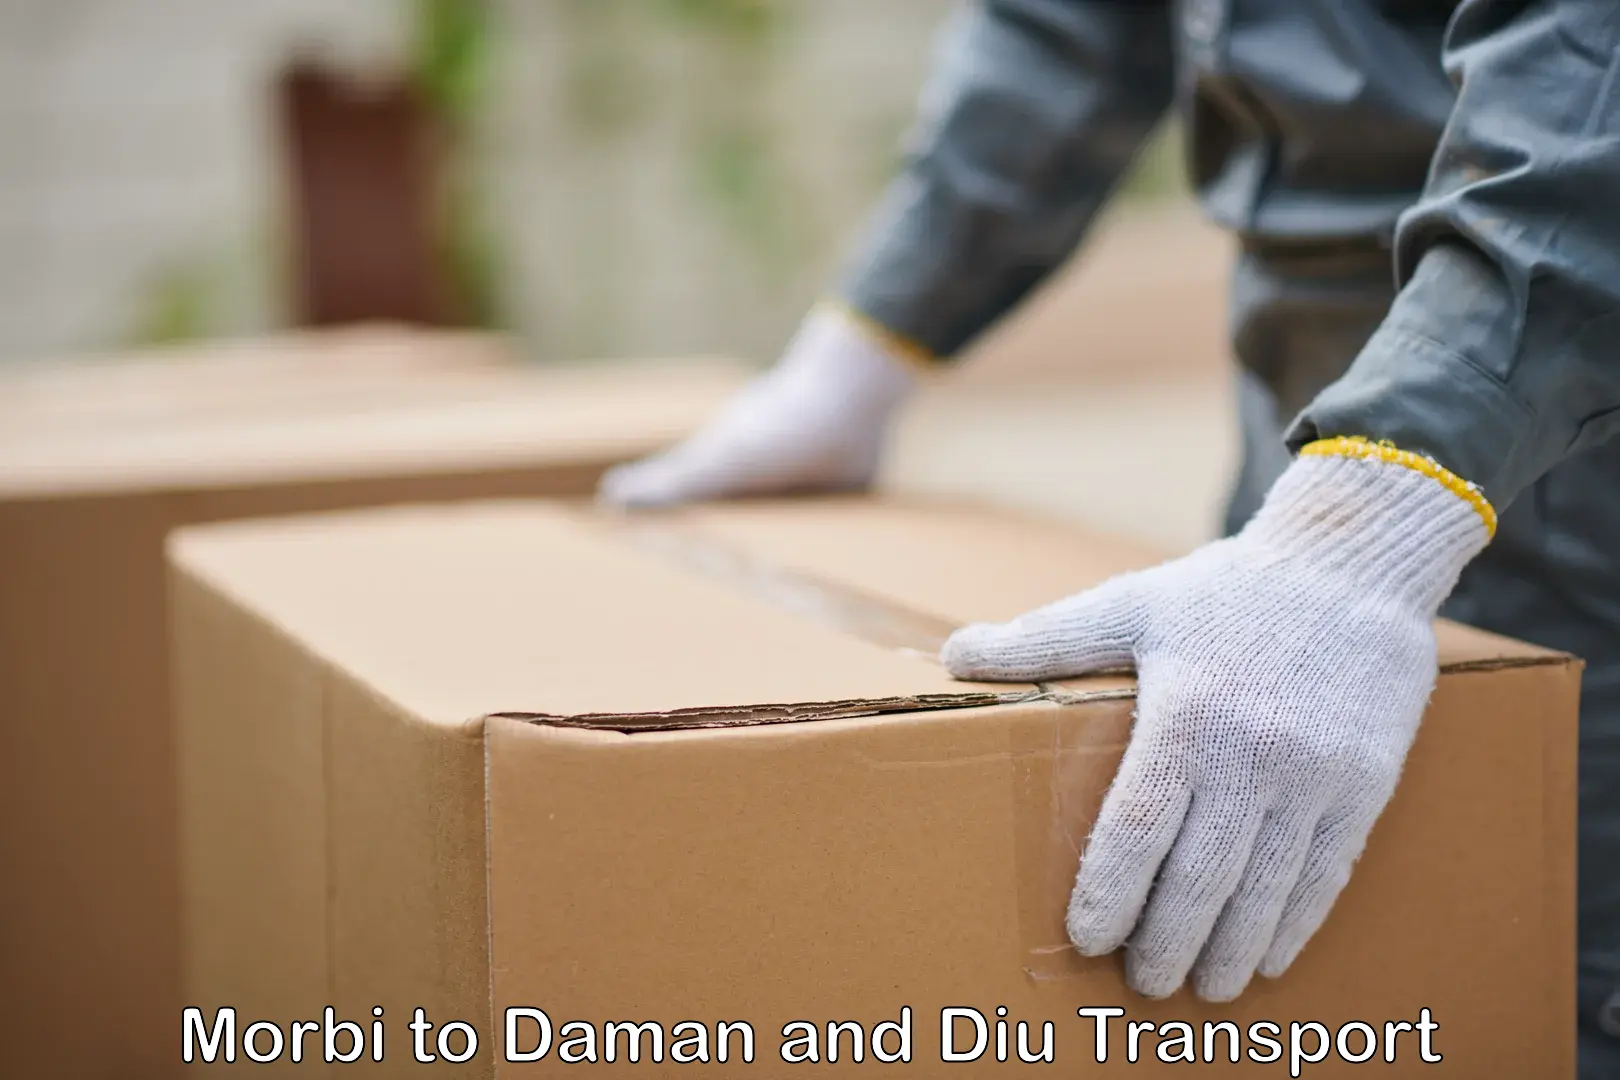 Truck transport companies in India Morbi to Daman and Diu